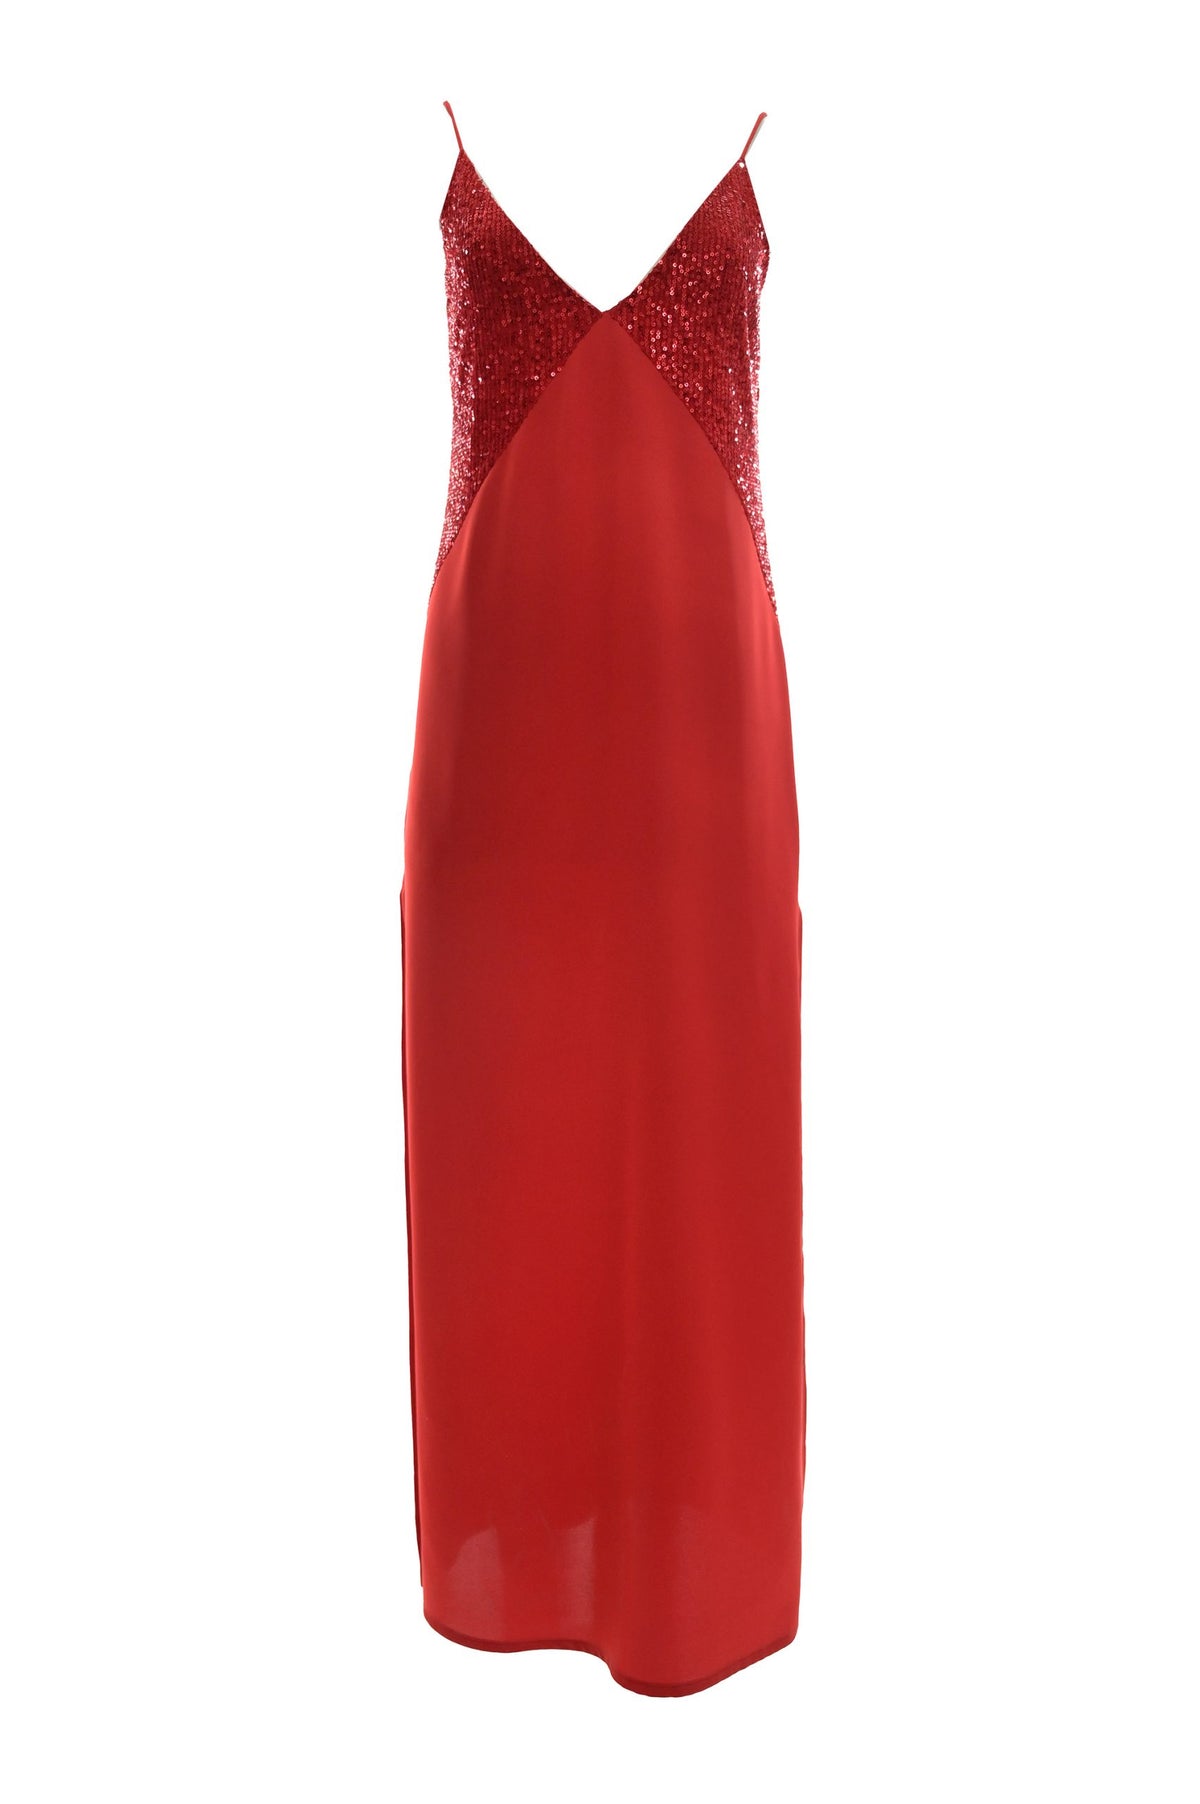 Ophelie Dress / Red